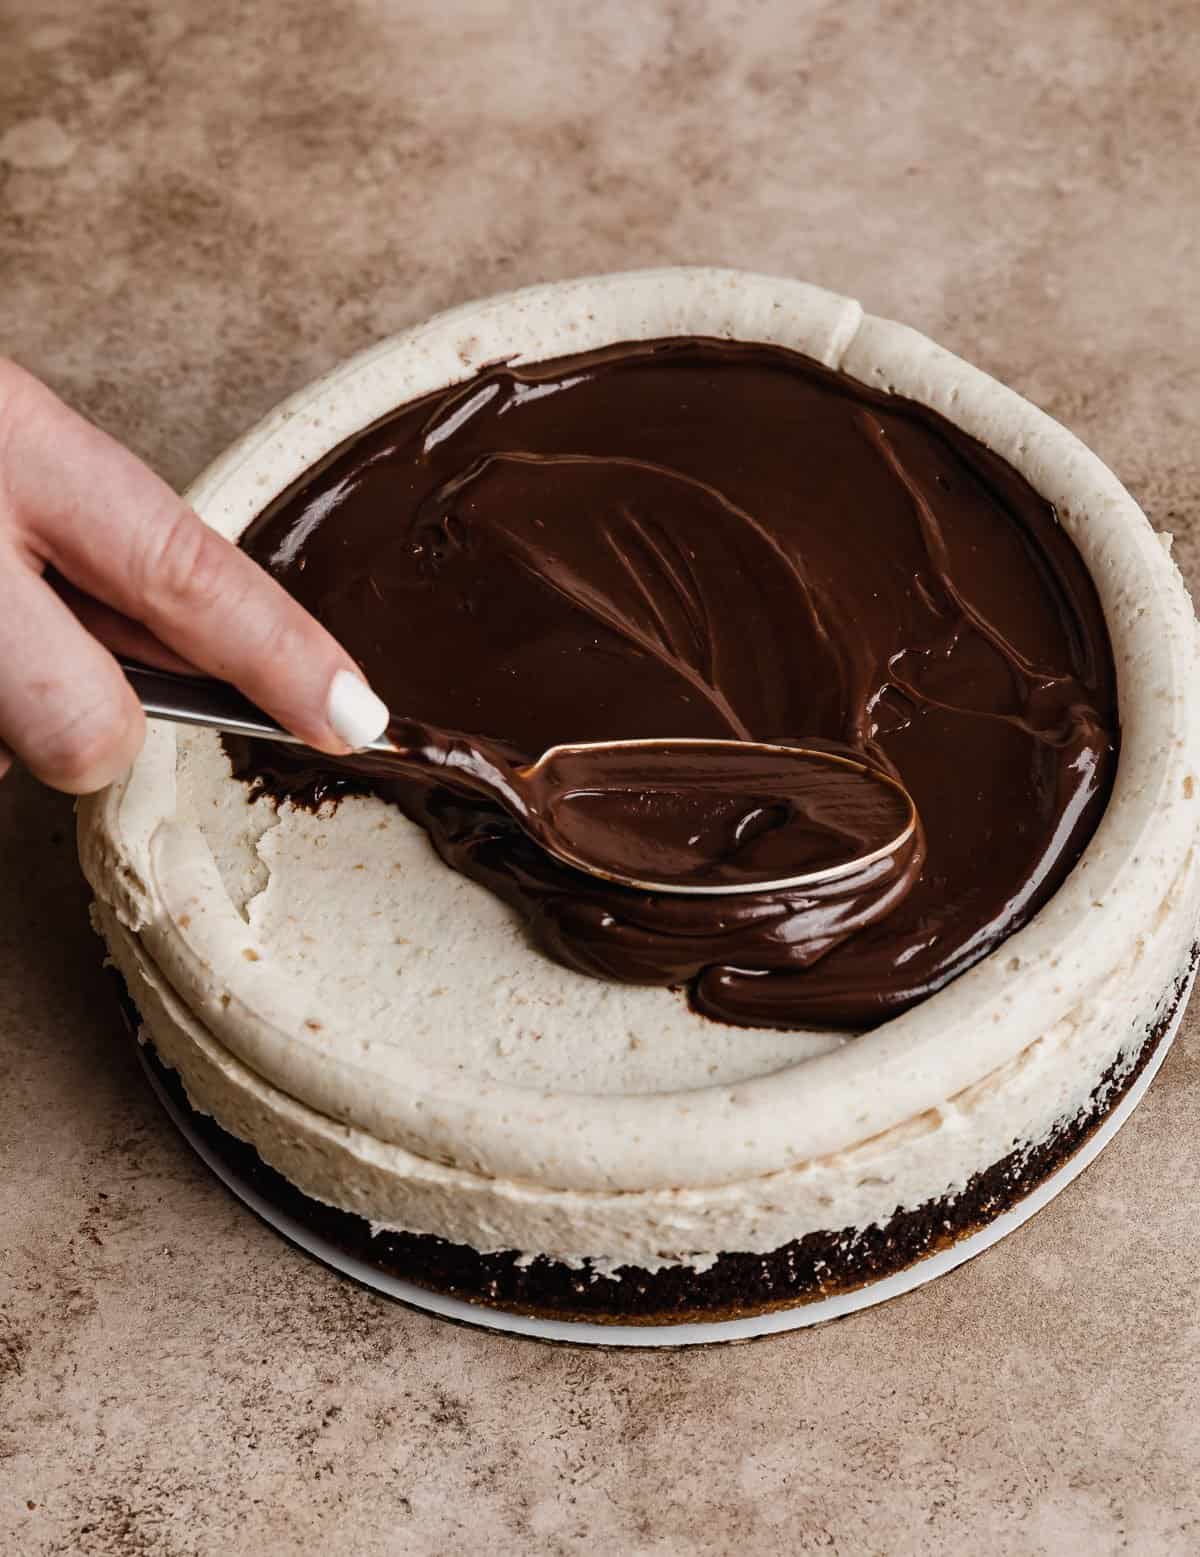 Chocolate ganache filling being spread overtop a frosted S'mores Cake layer.